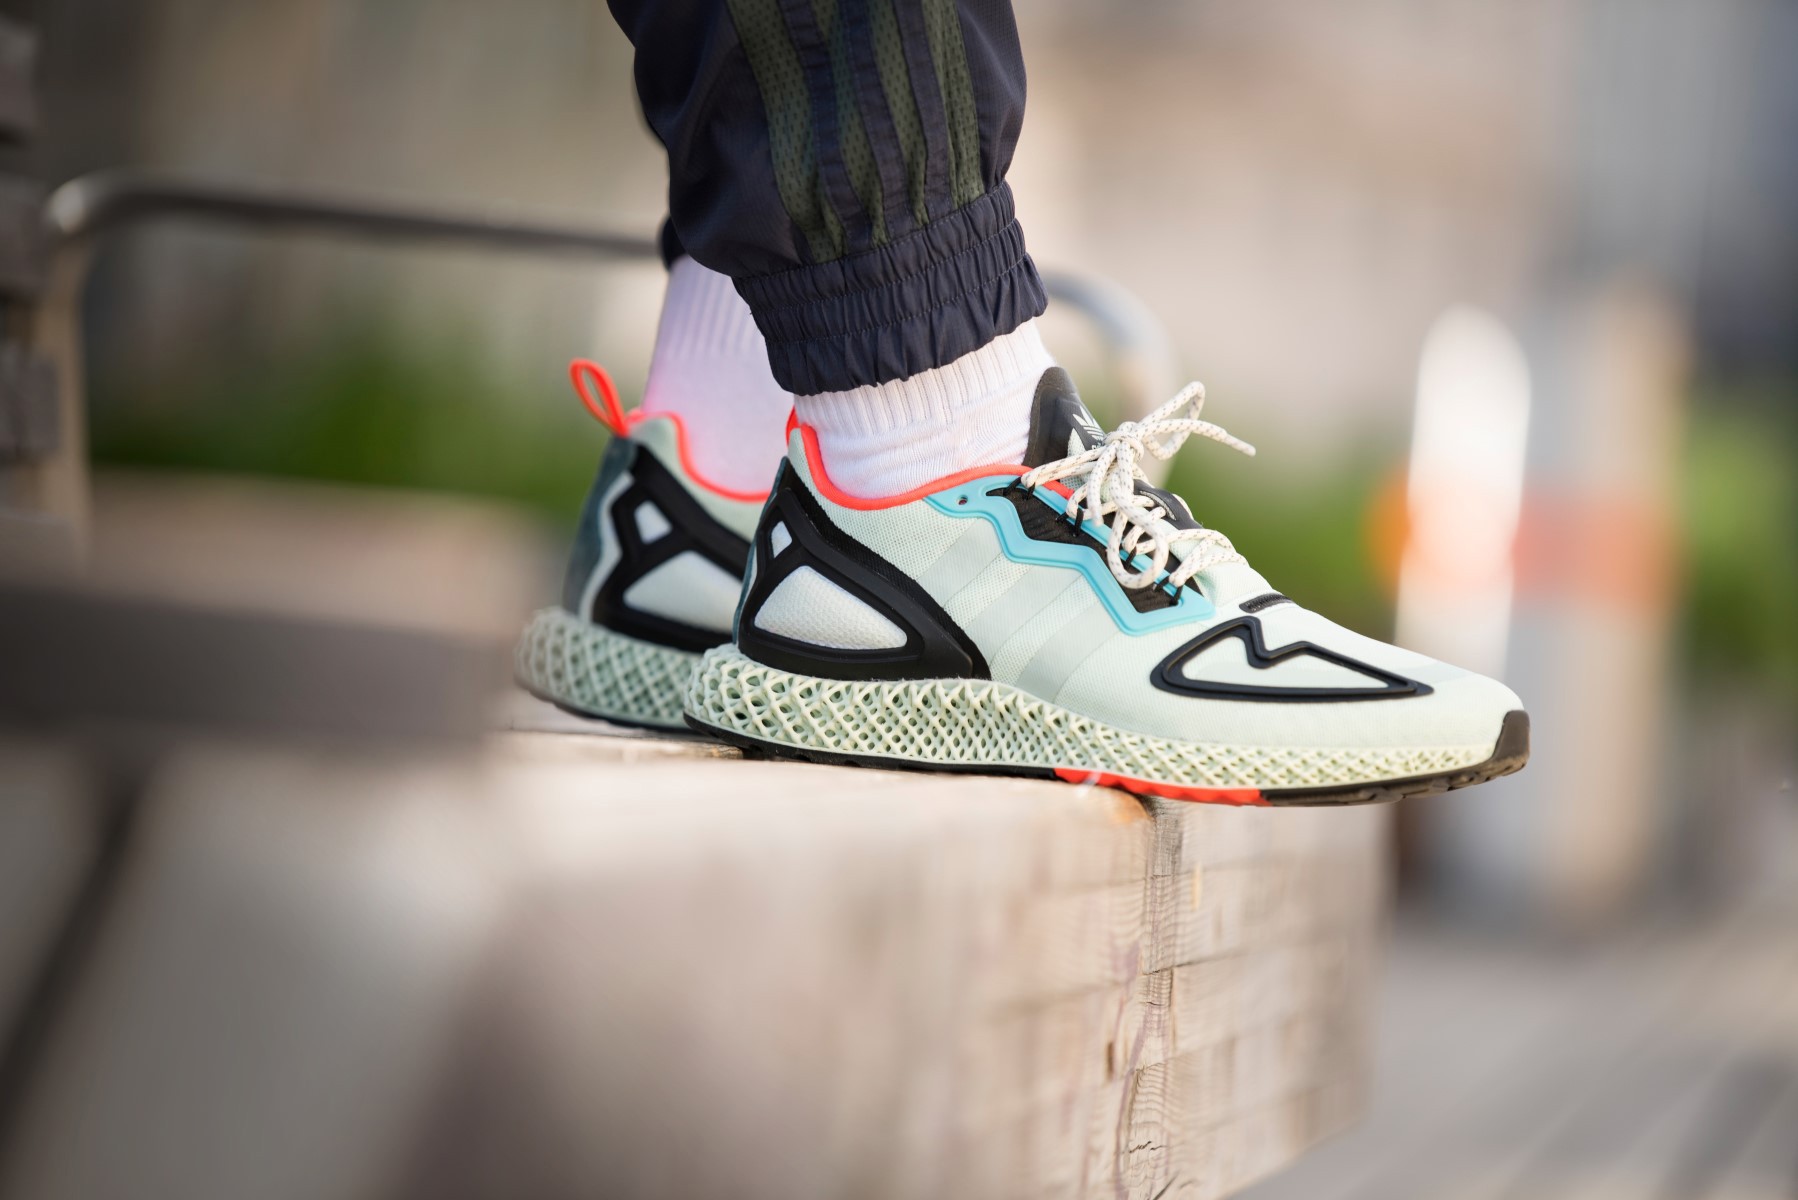 WOMFT? Review - ADIDAS ZX 2K 4D „Green Dash“ - WOMFT? - On My Feet Today? - Blog